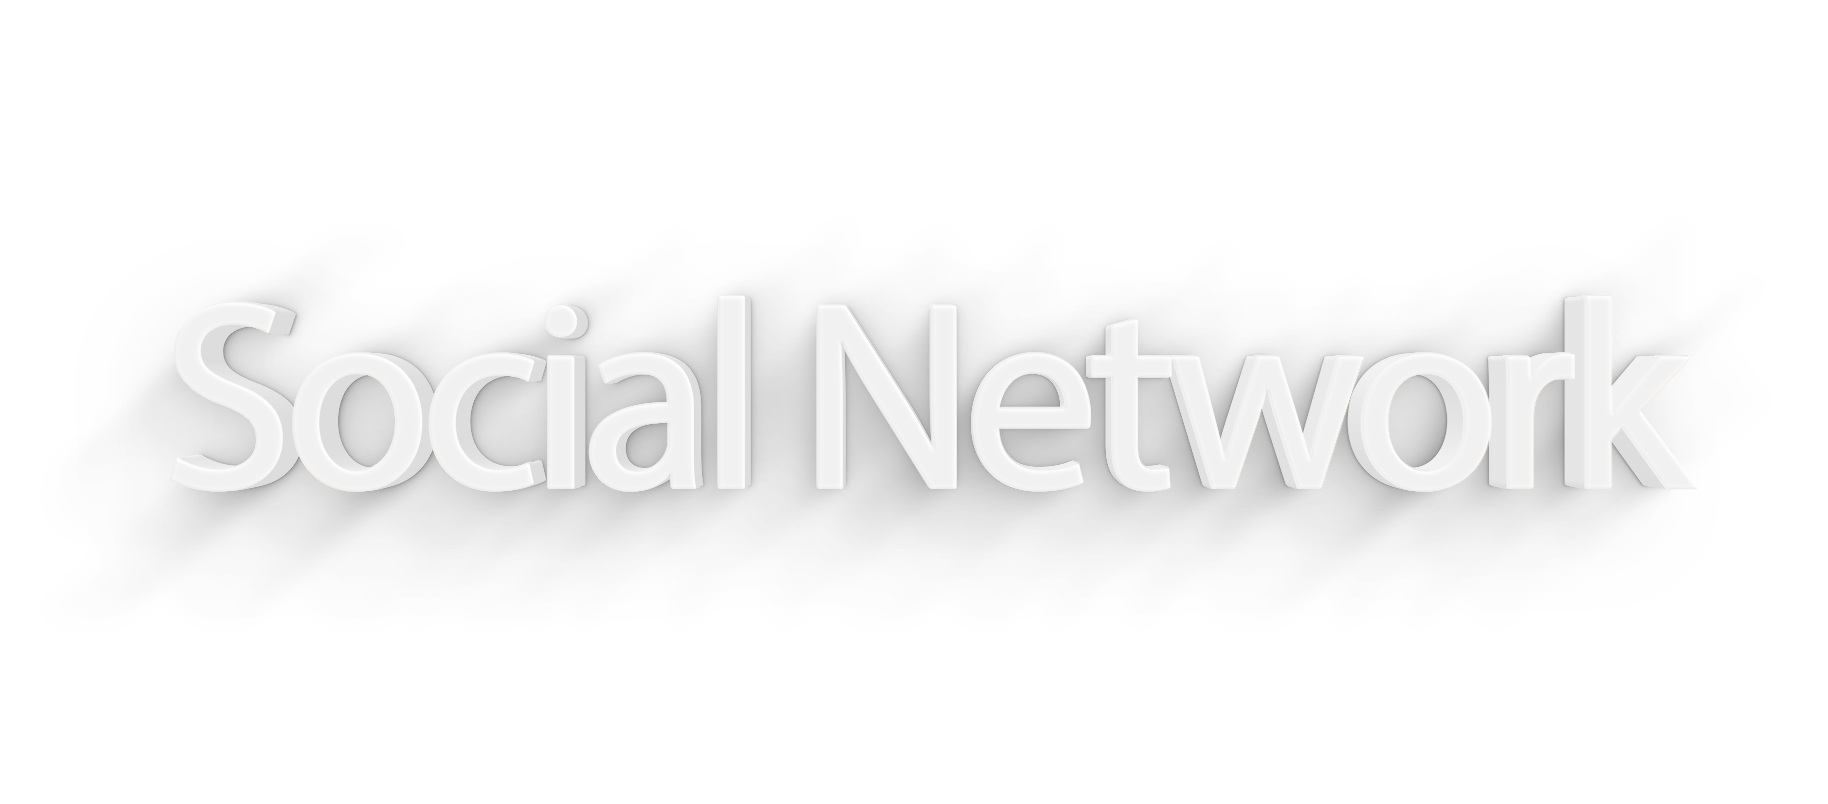 Social Network png, word Social Network png, Social Network word png, Social Network text png, Social Network font png, word Social Network text effects typography PNG transparent images